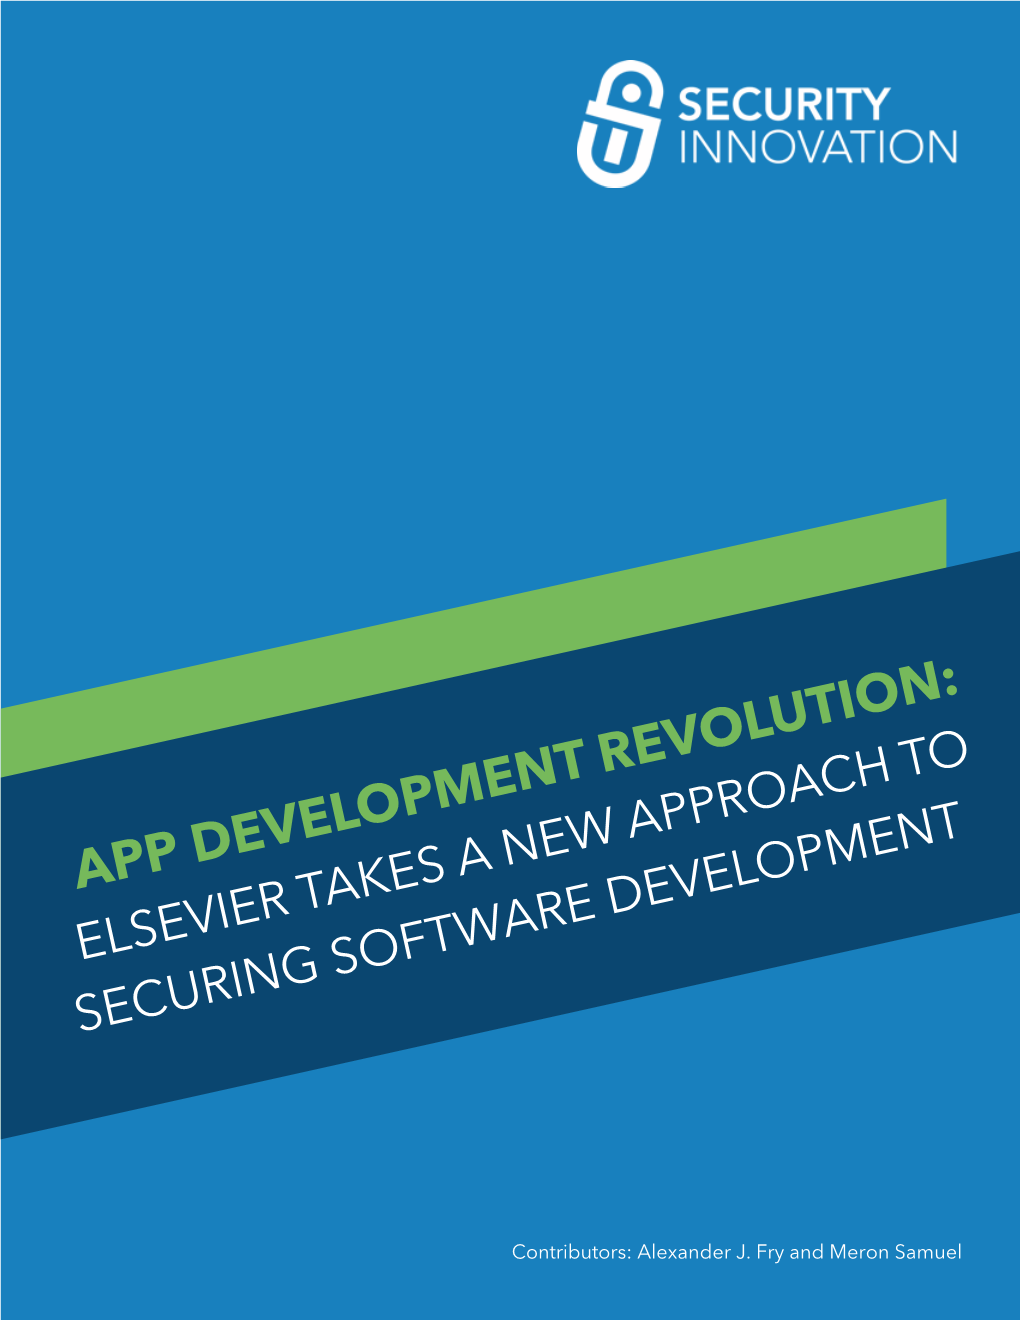 App Development Revolution: Elsevier Takes a Arenew Development Approach to Securing Softw